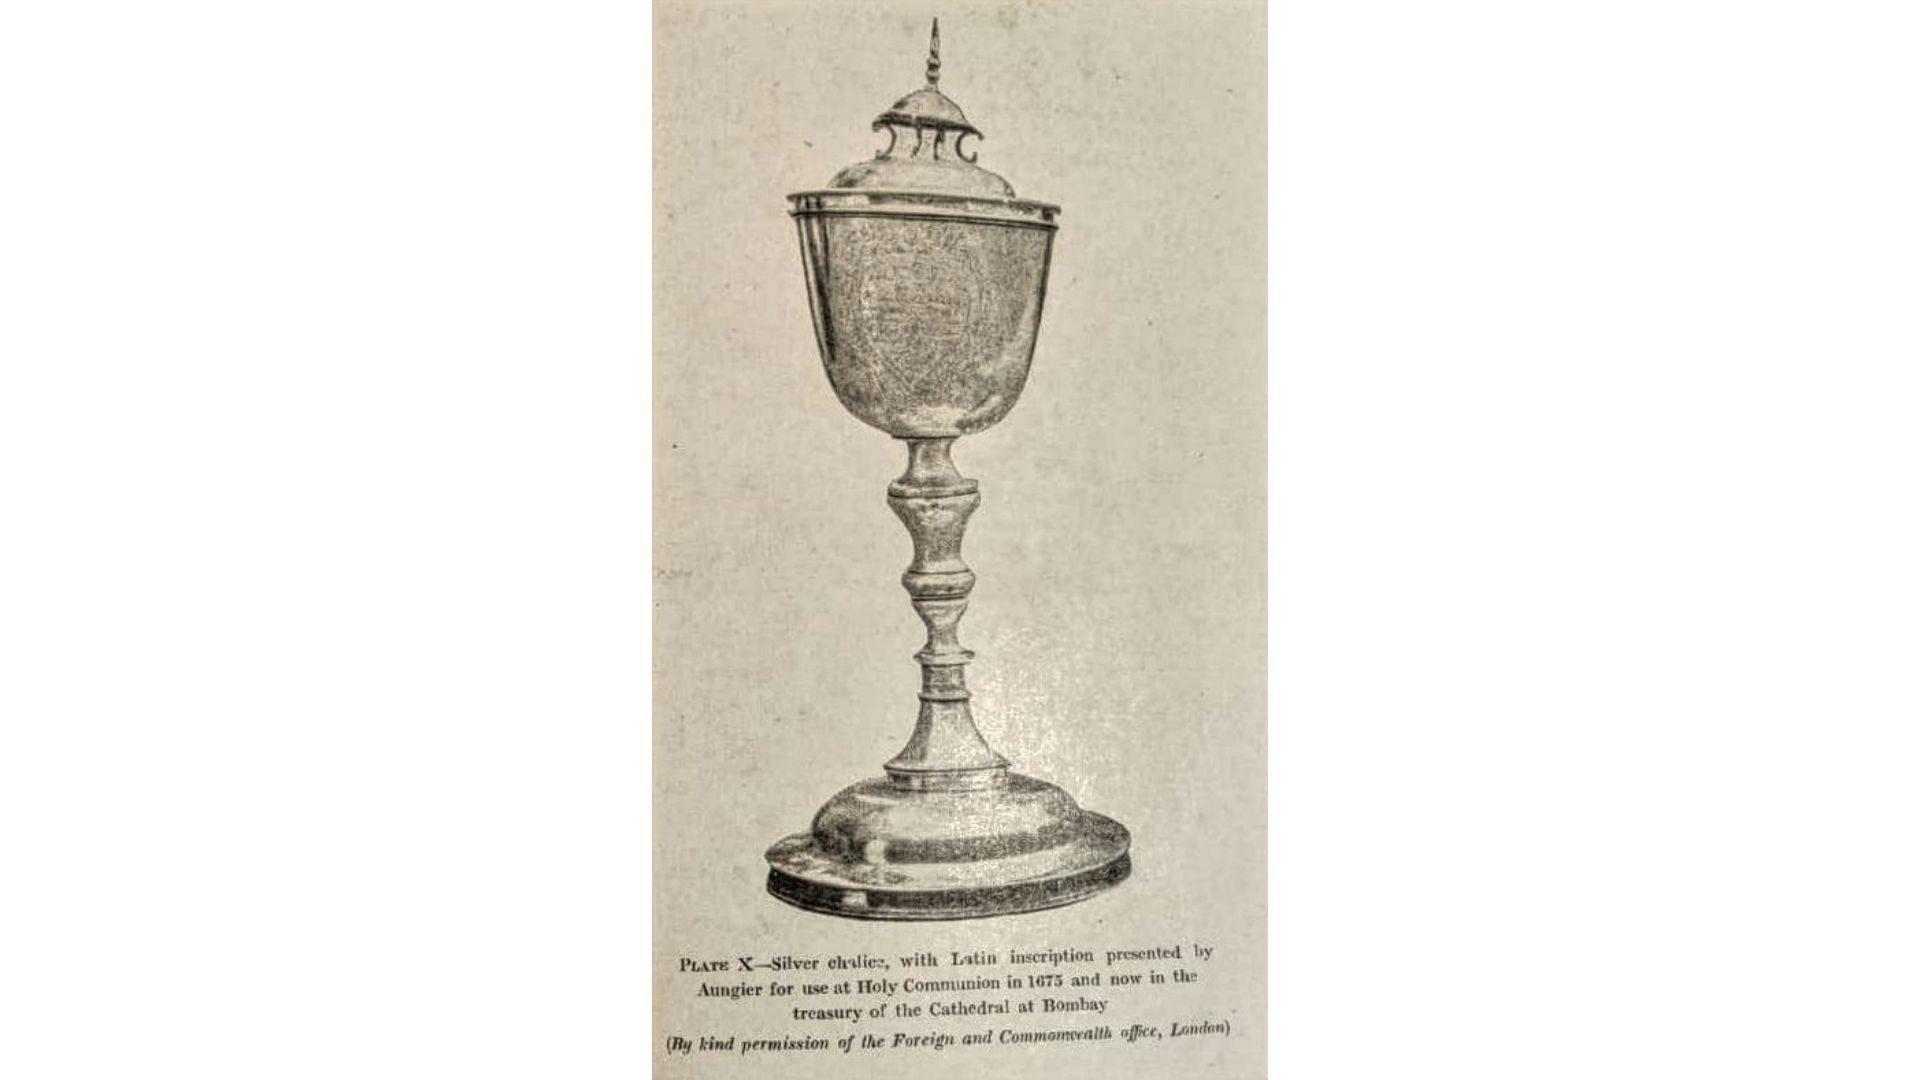 Silver Chalice presented by Gerald Aungier to St. Thomas Cathedral in 1673